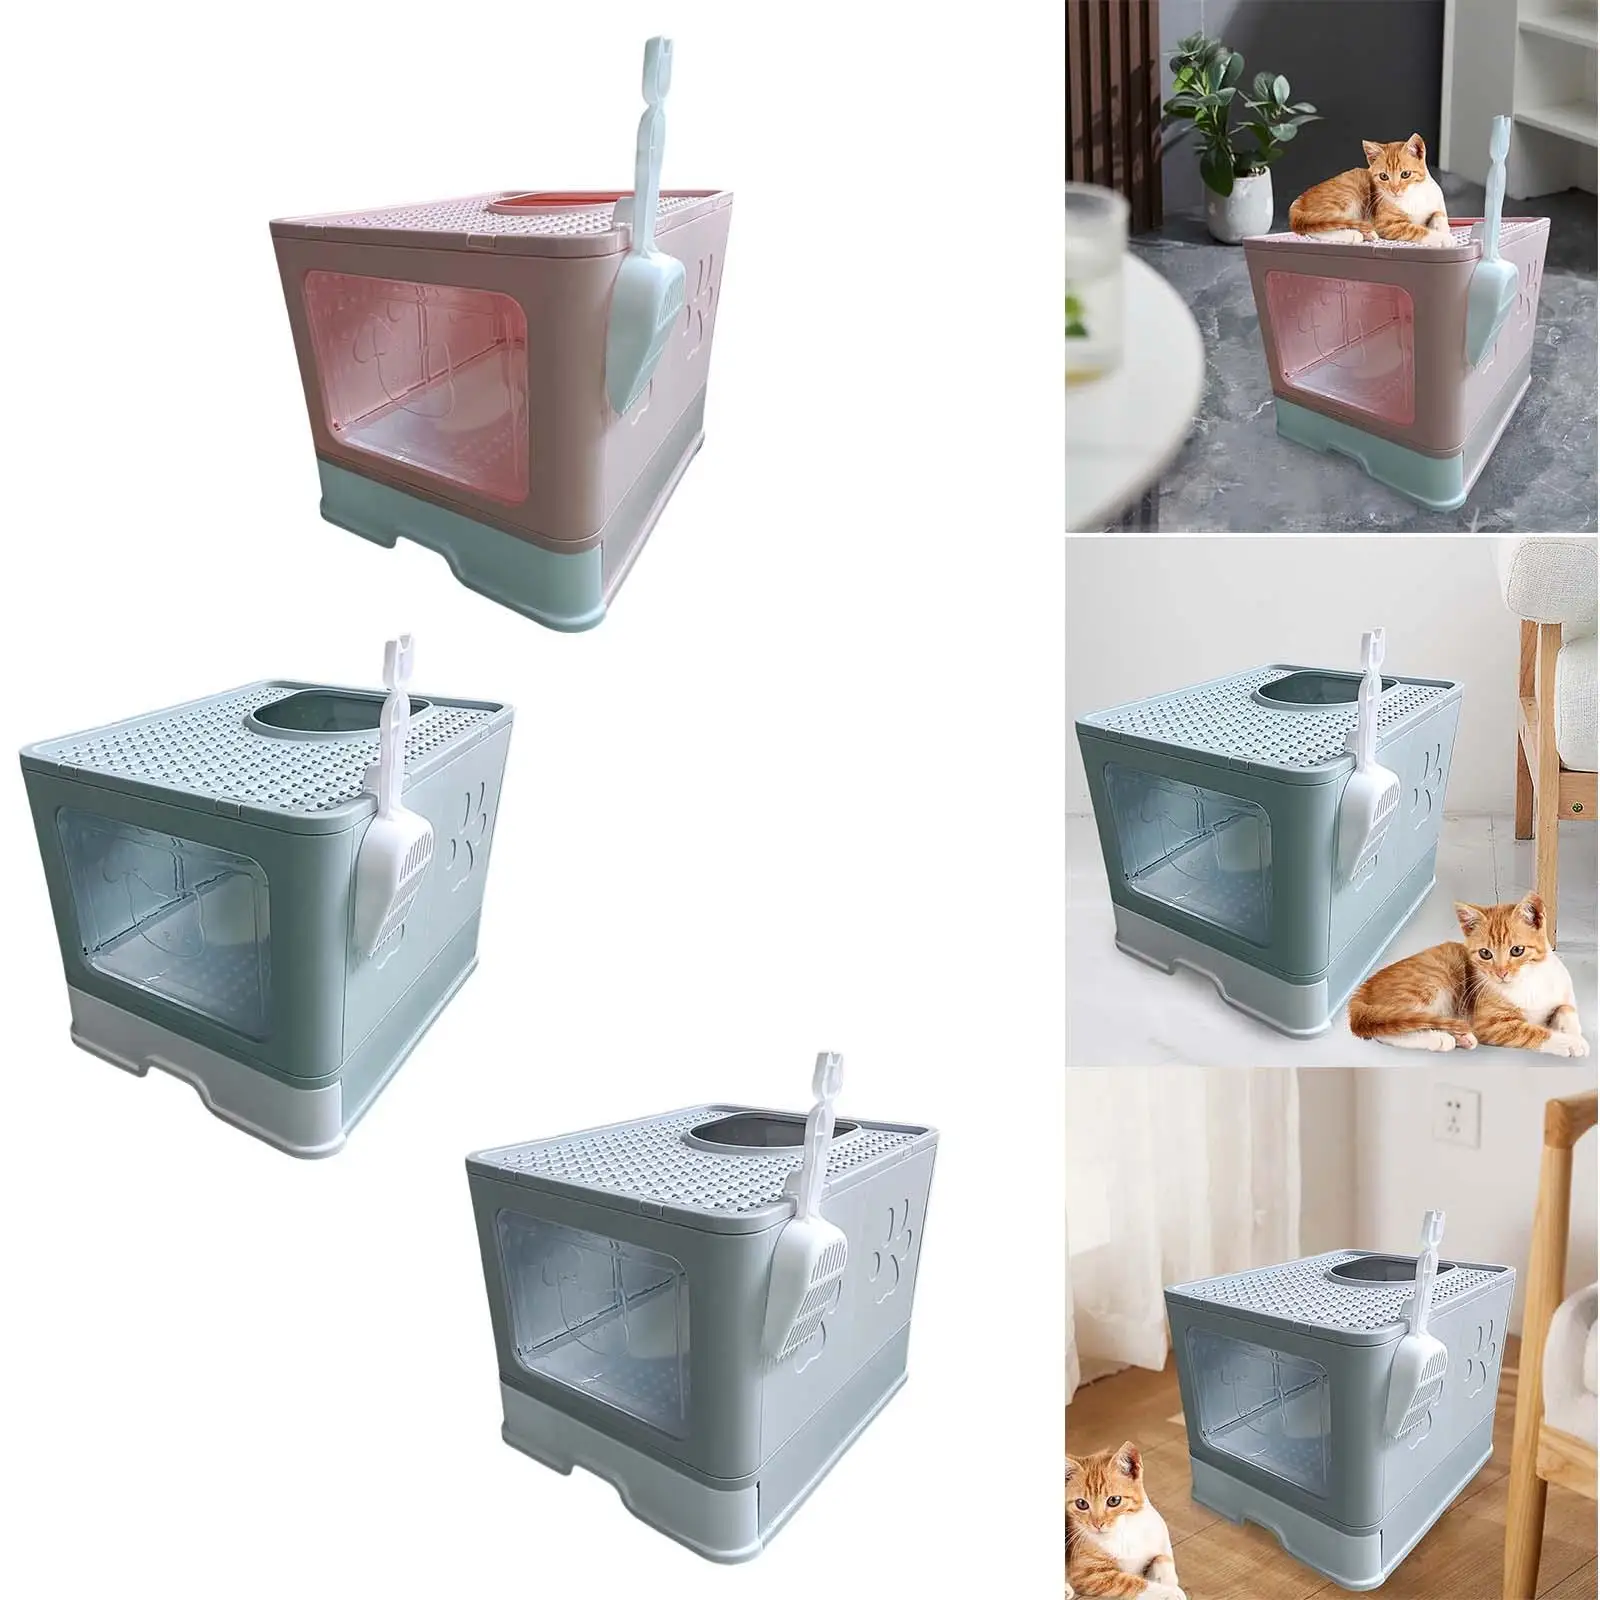 Hooded Cat Litter Box Pet Litter Box Enclosed and Covered Cat Toilet Litter Box